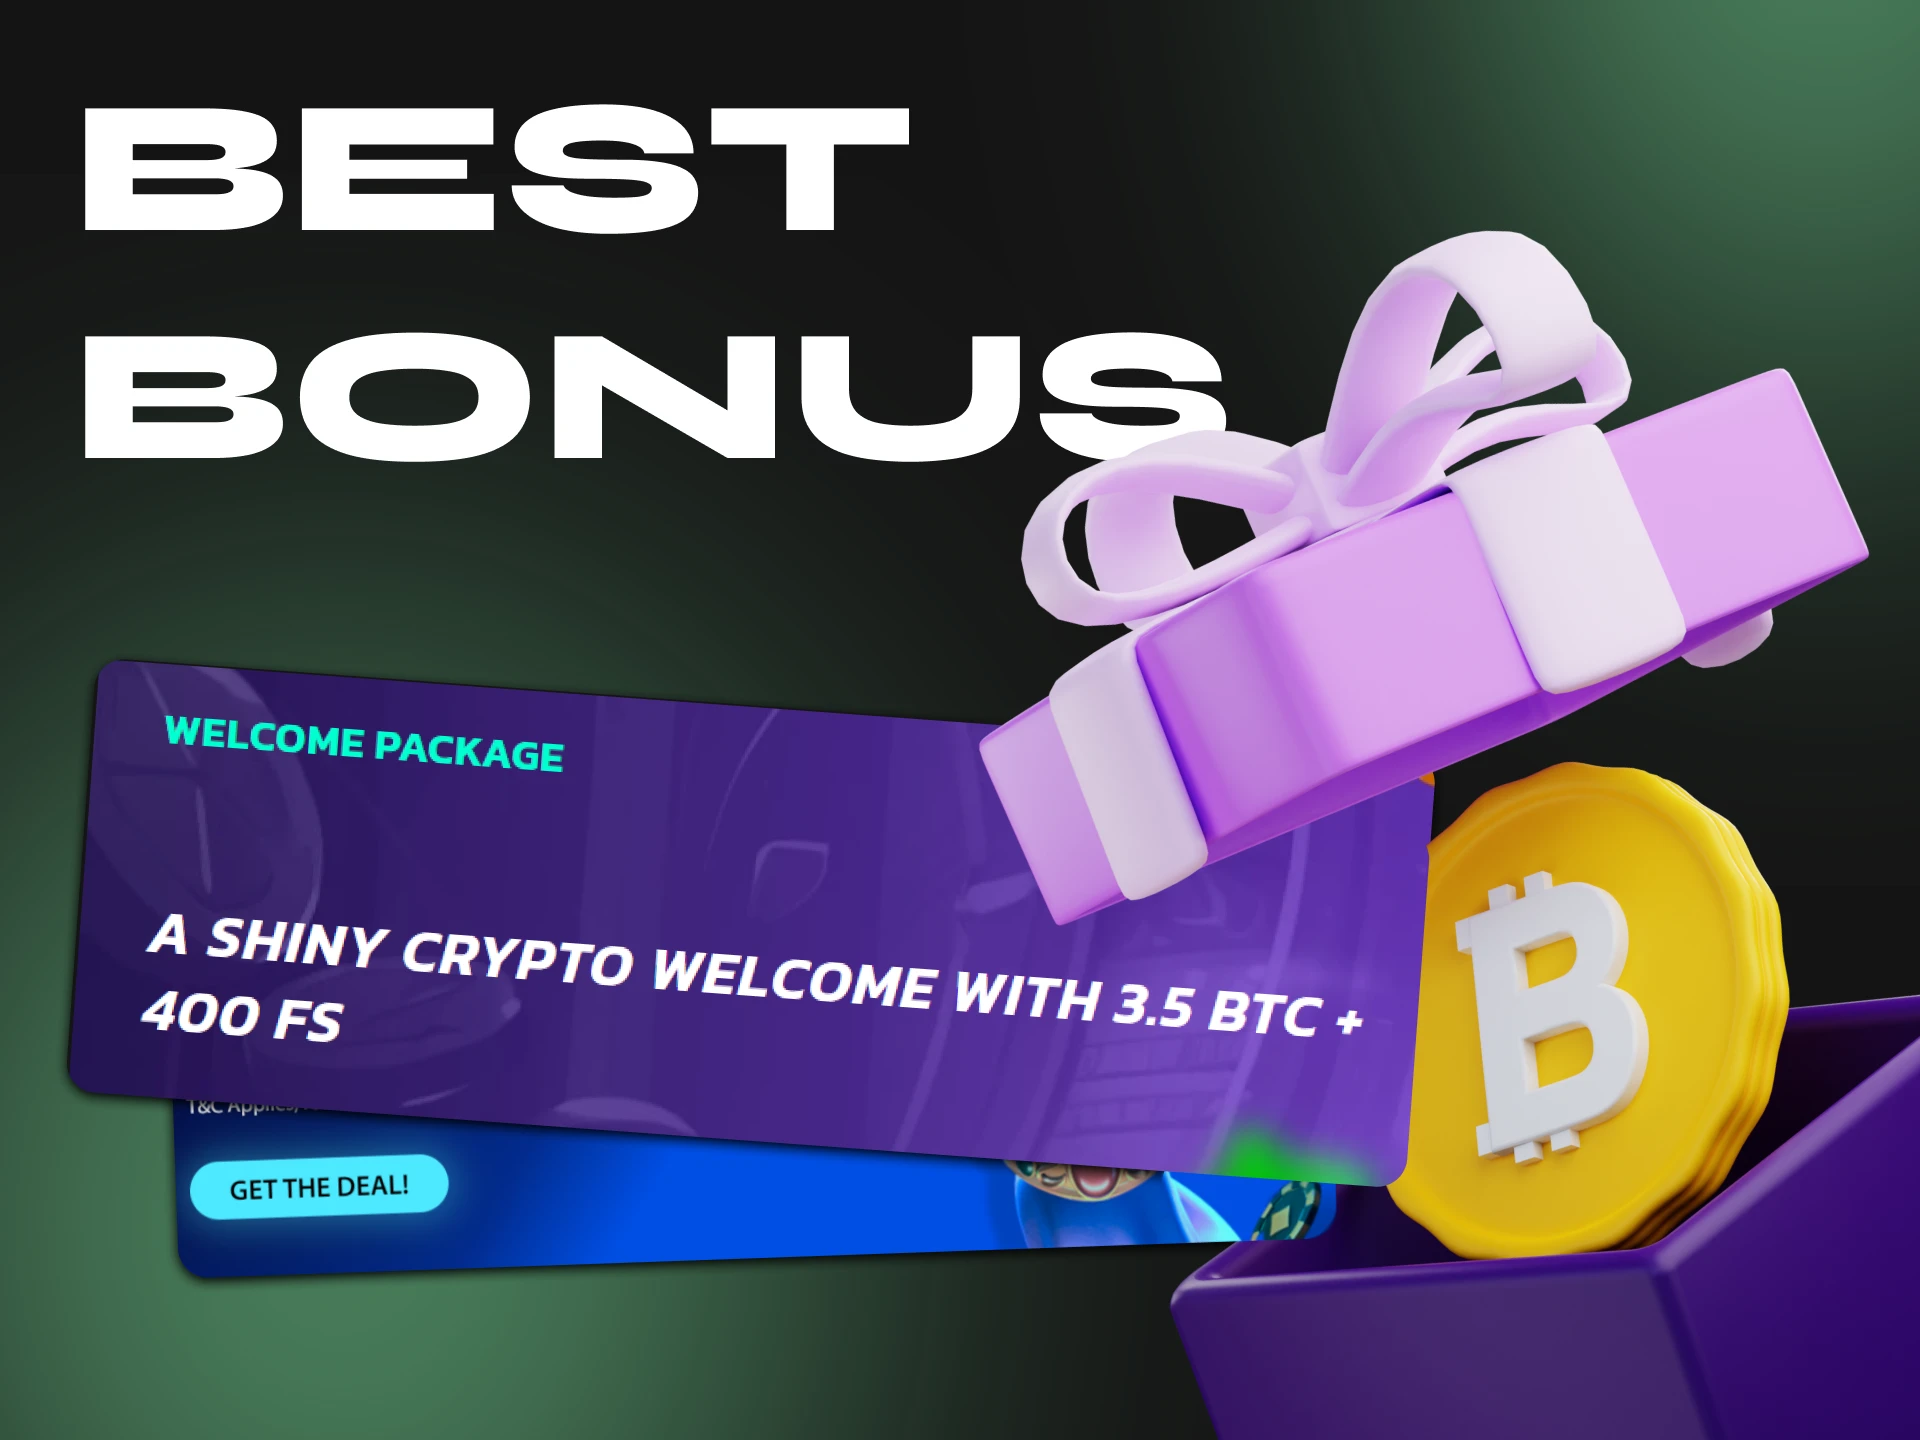 Here are crypto casinos with the best bitcoin bonuses.